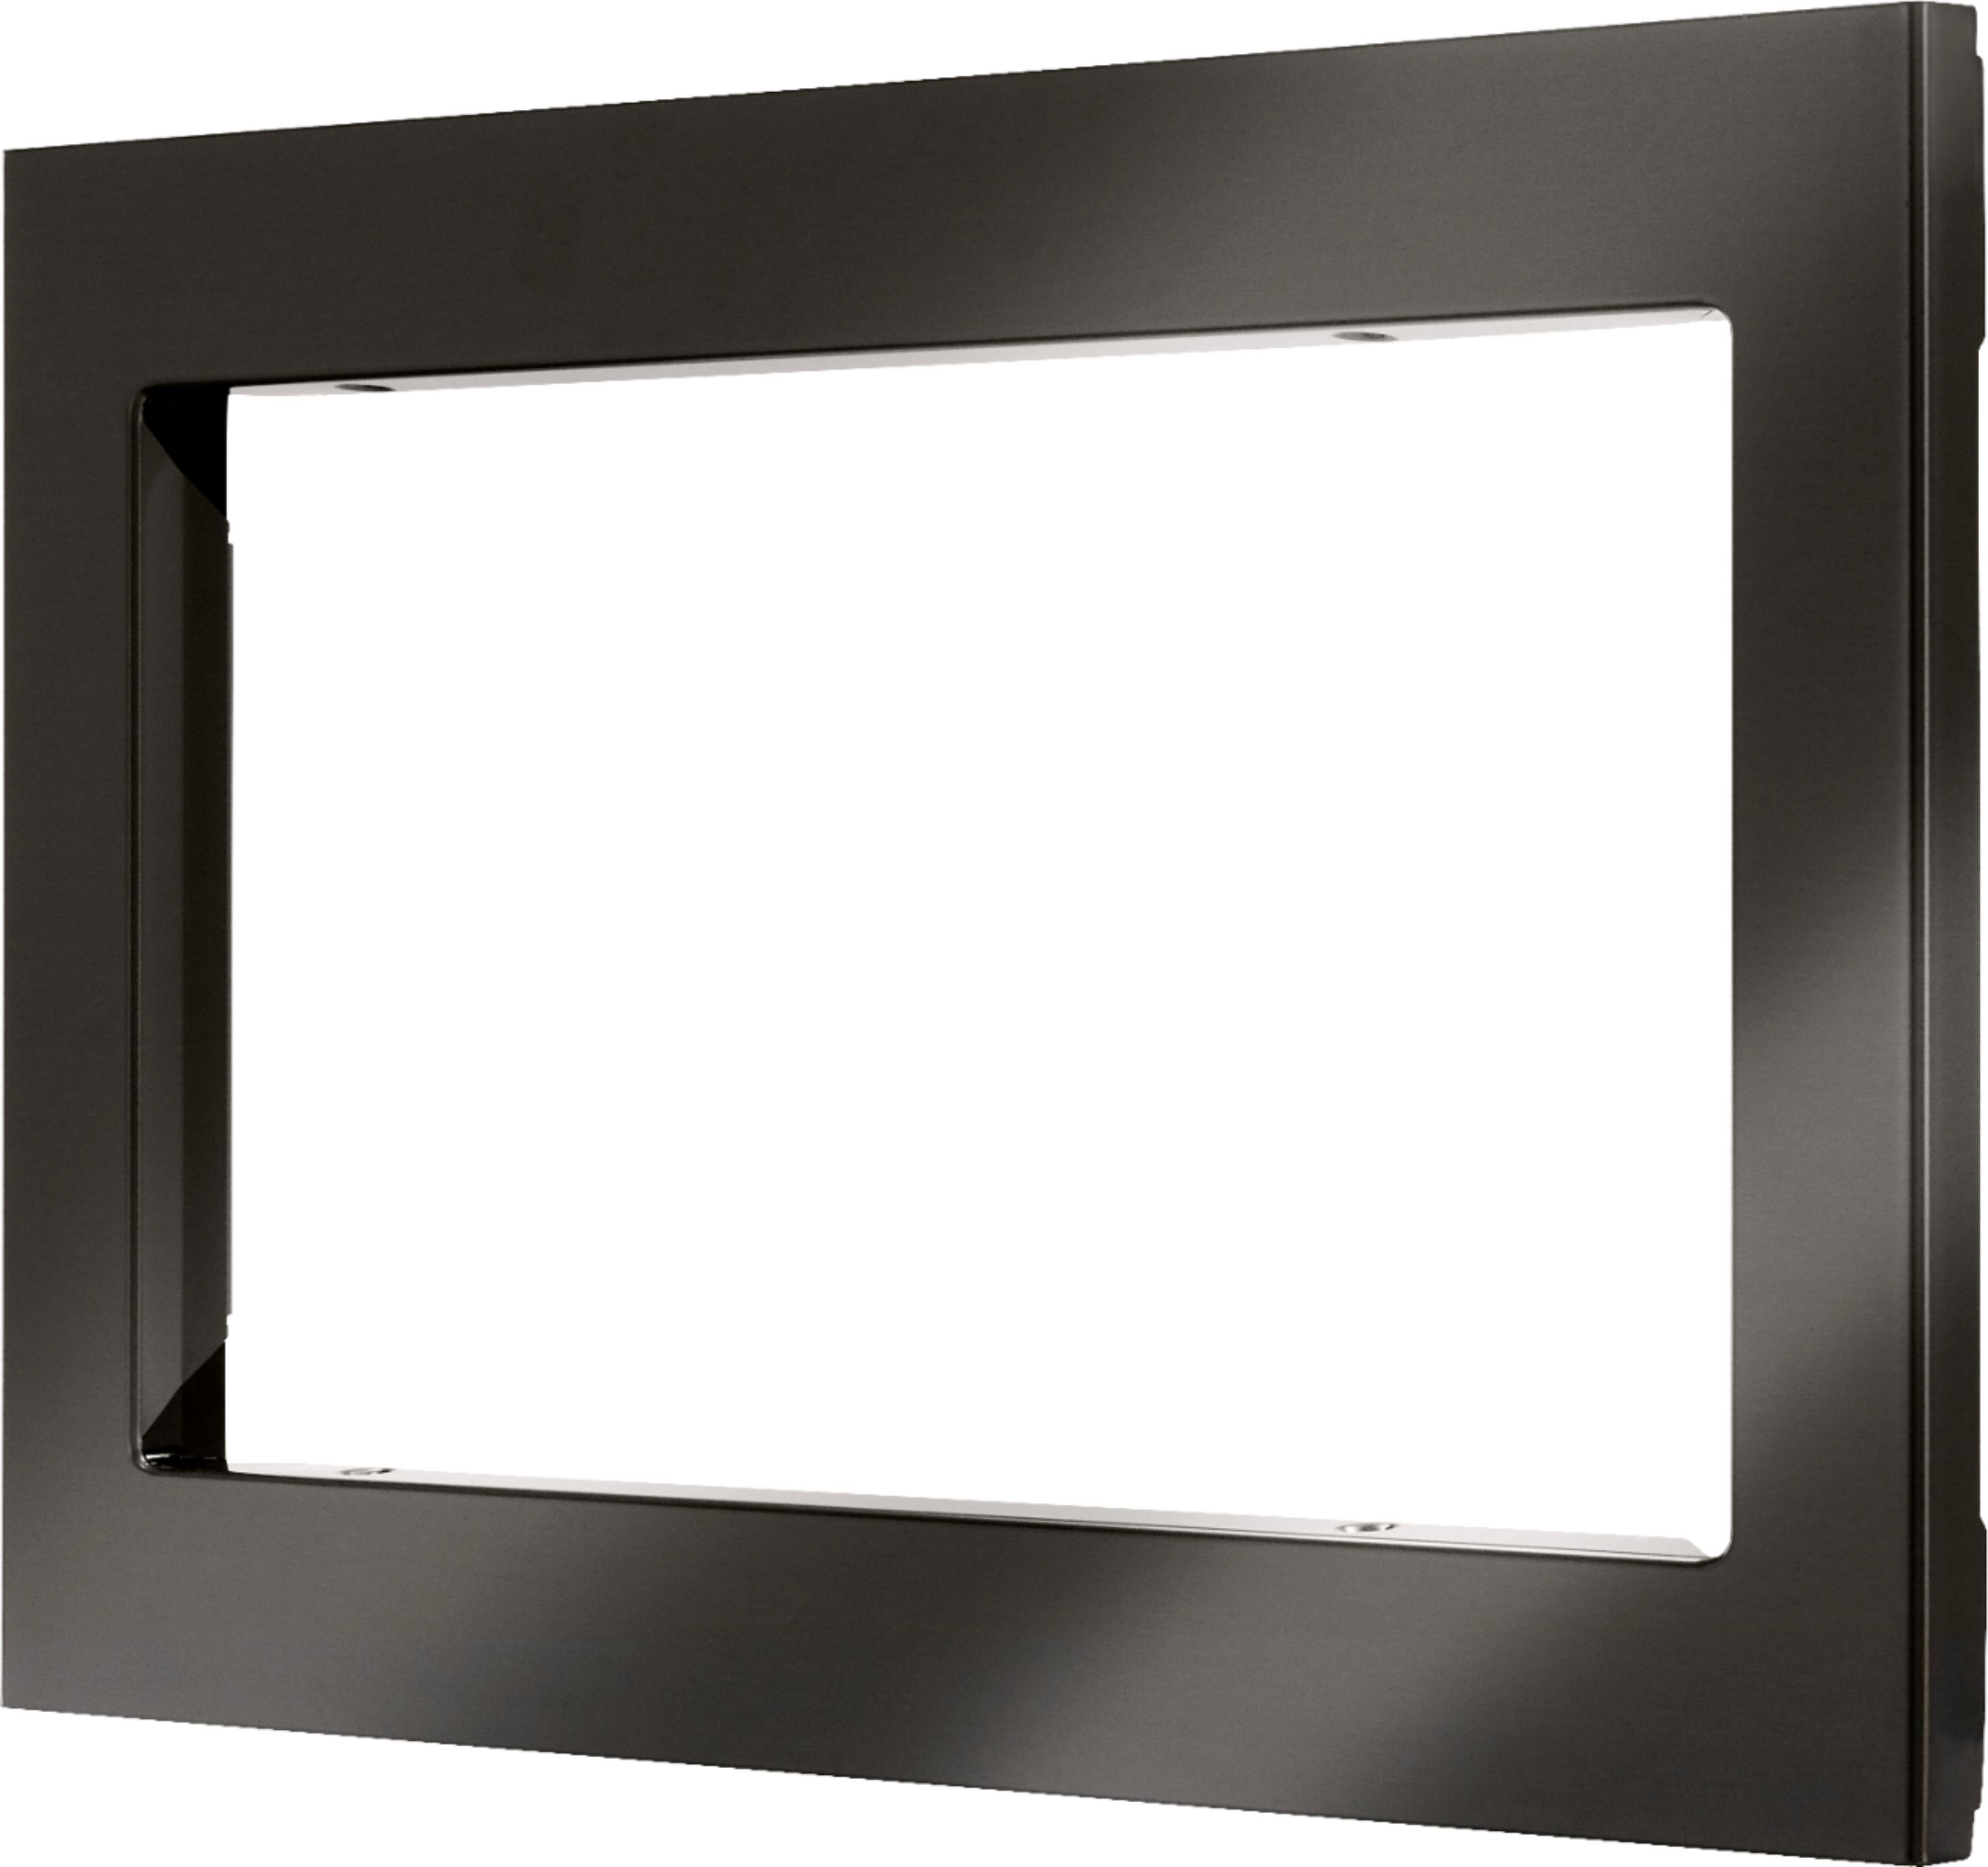 Left View: 29.7" Trim Kit for LG Microwaves - Black Stainless Steel